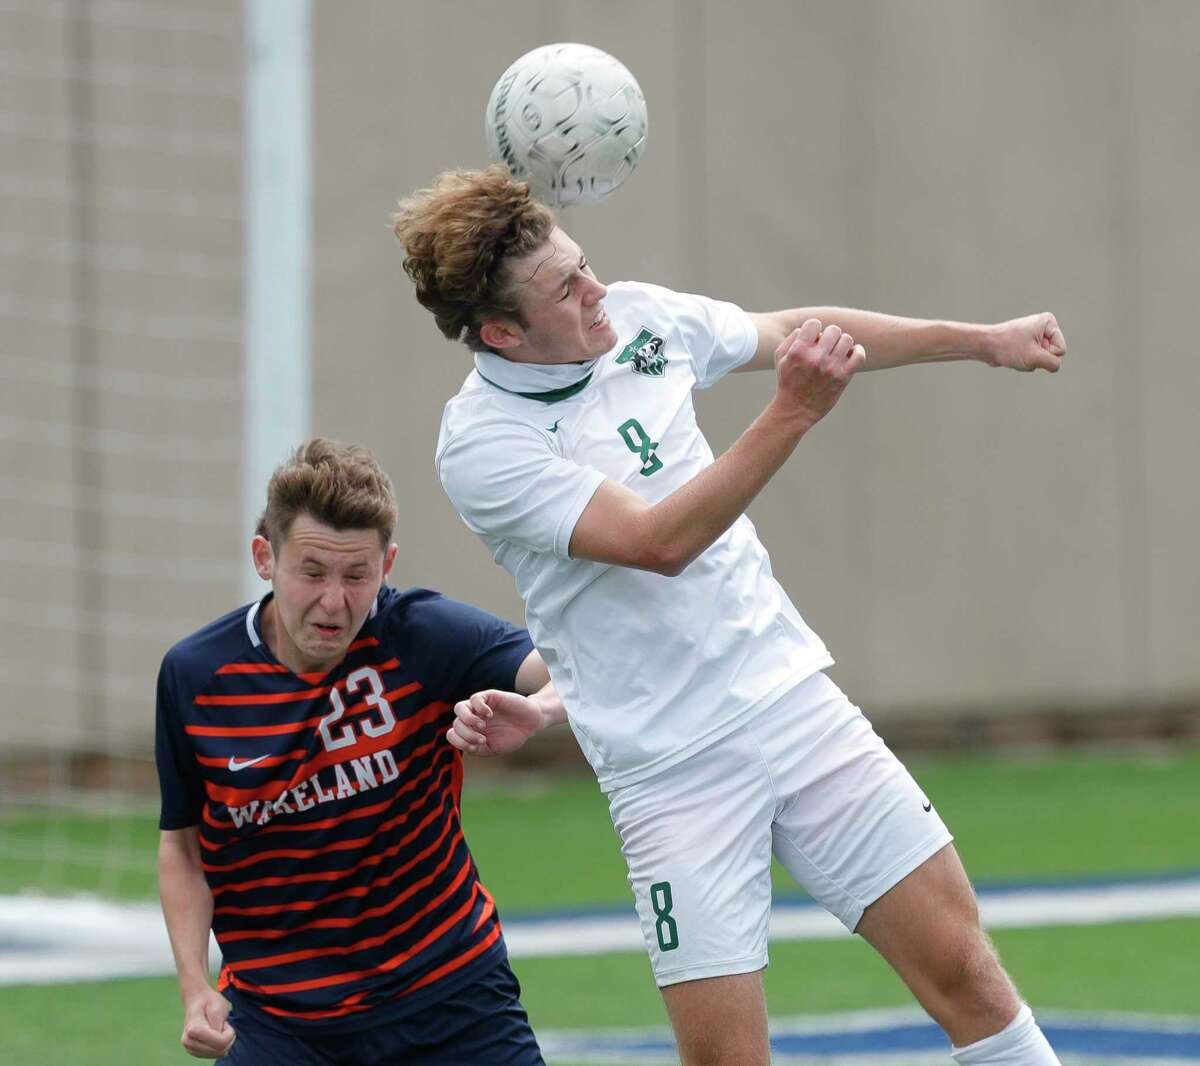 Kingwood Park forward Nathan Jimerson (8) heads the ball against Frisco Wakeland defender Jacob Rulon (23) in the first period of the UIL Class 5A boys soccer championship, Saturday, April 17, 2021, in Georgetown.